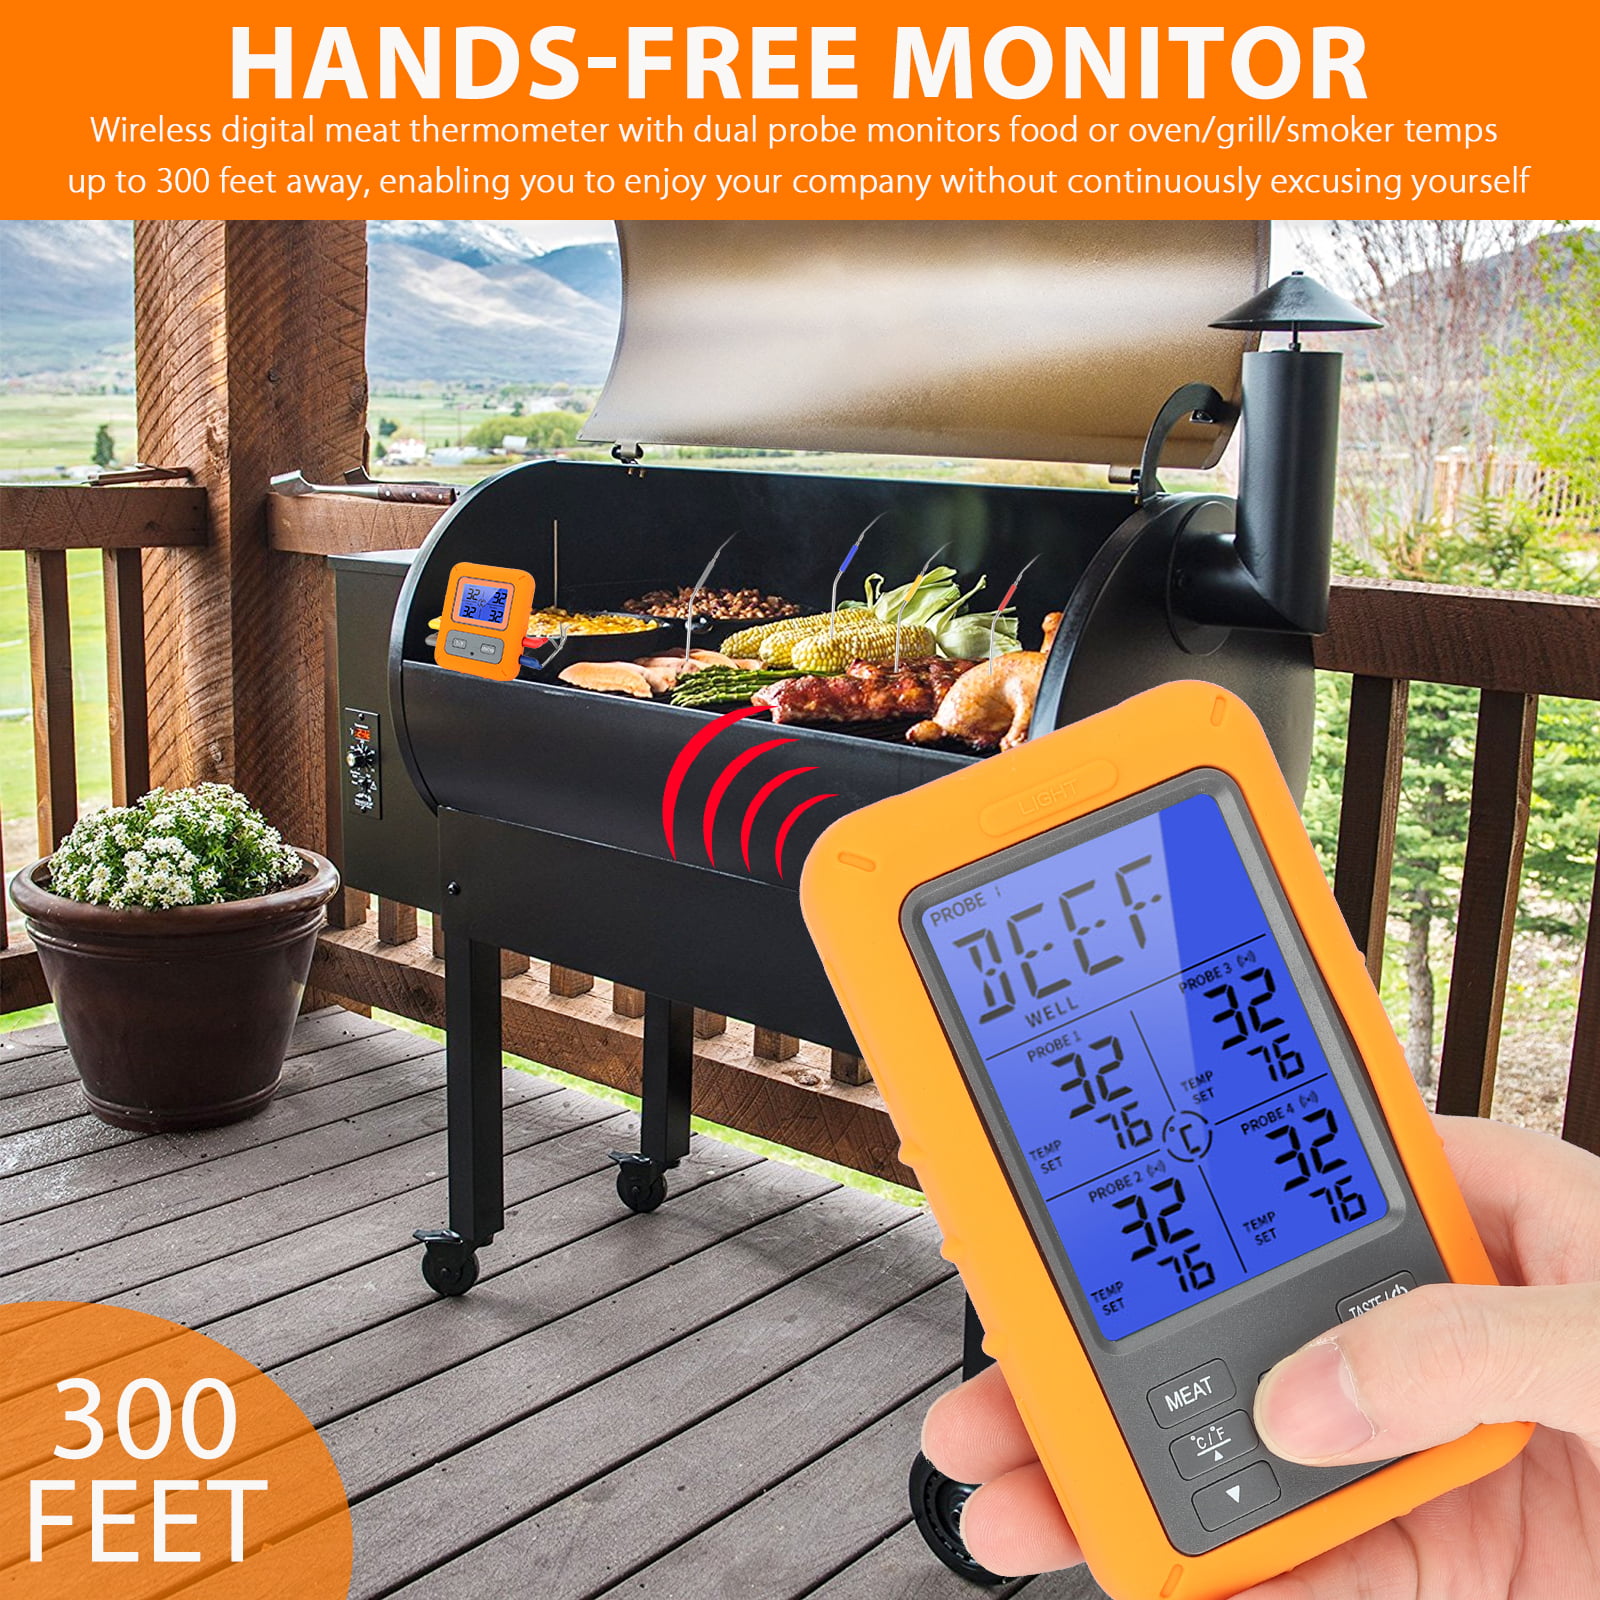 Stainless Steel Oven Thermometer Grill Smoker Monitoring Home Kitchen Cooking Instant Read Thermometer by Balai 